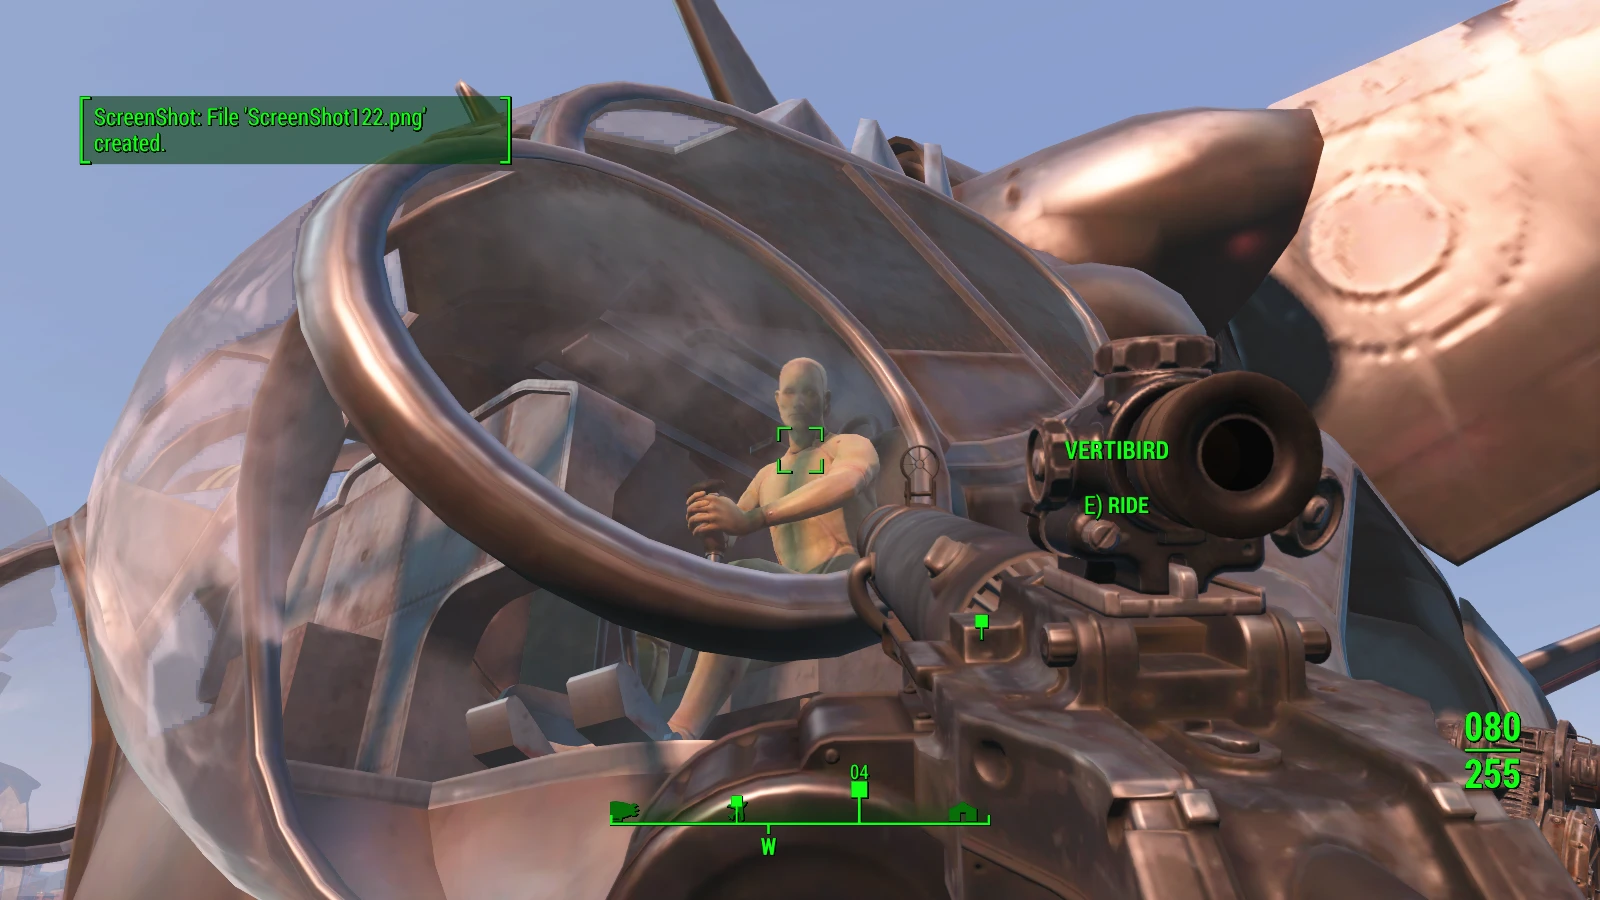 Vertibirds in fallout 4 фото 24